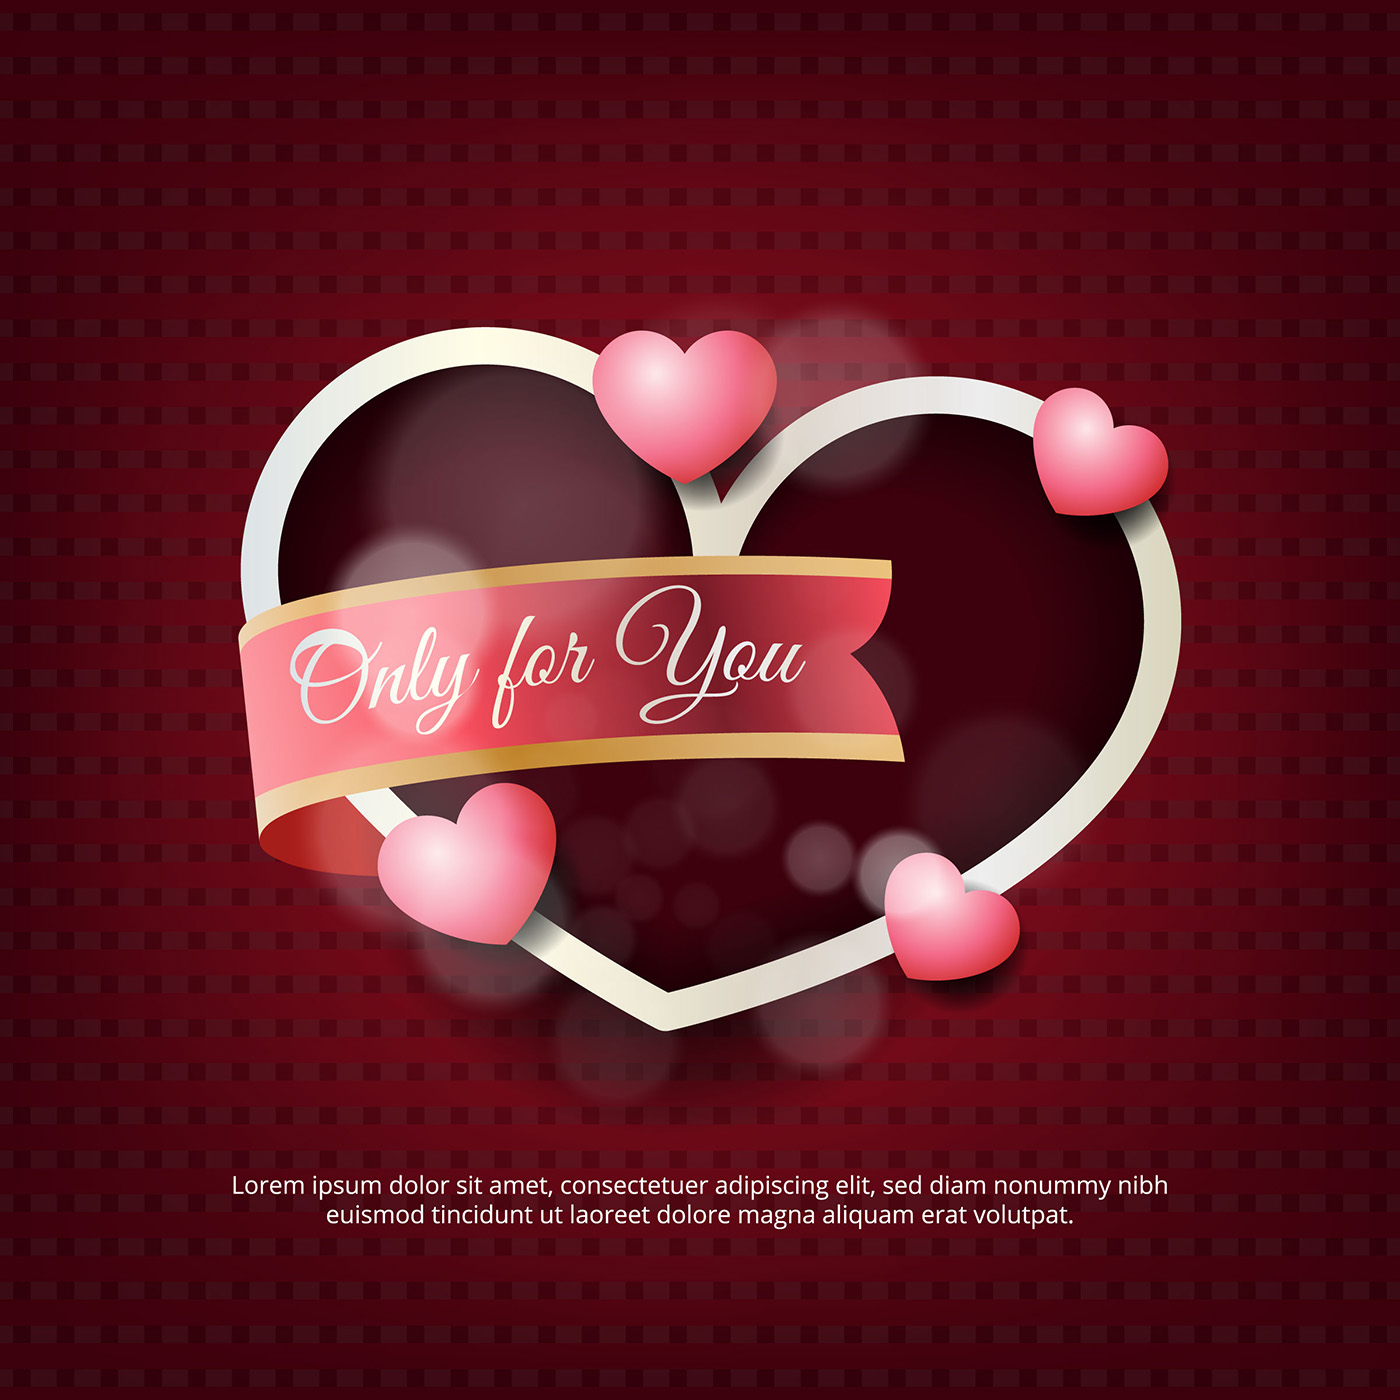 Realistic valentine's day background - Download Free Vector Art, Stock Graphics & Images1400 x 1400